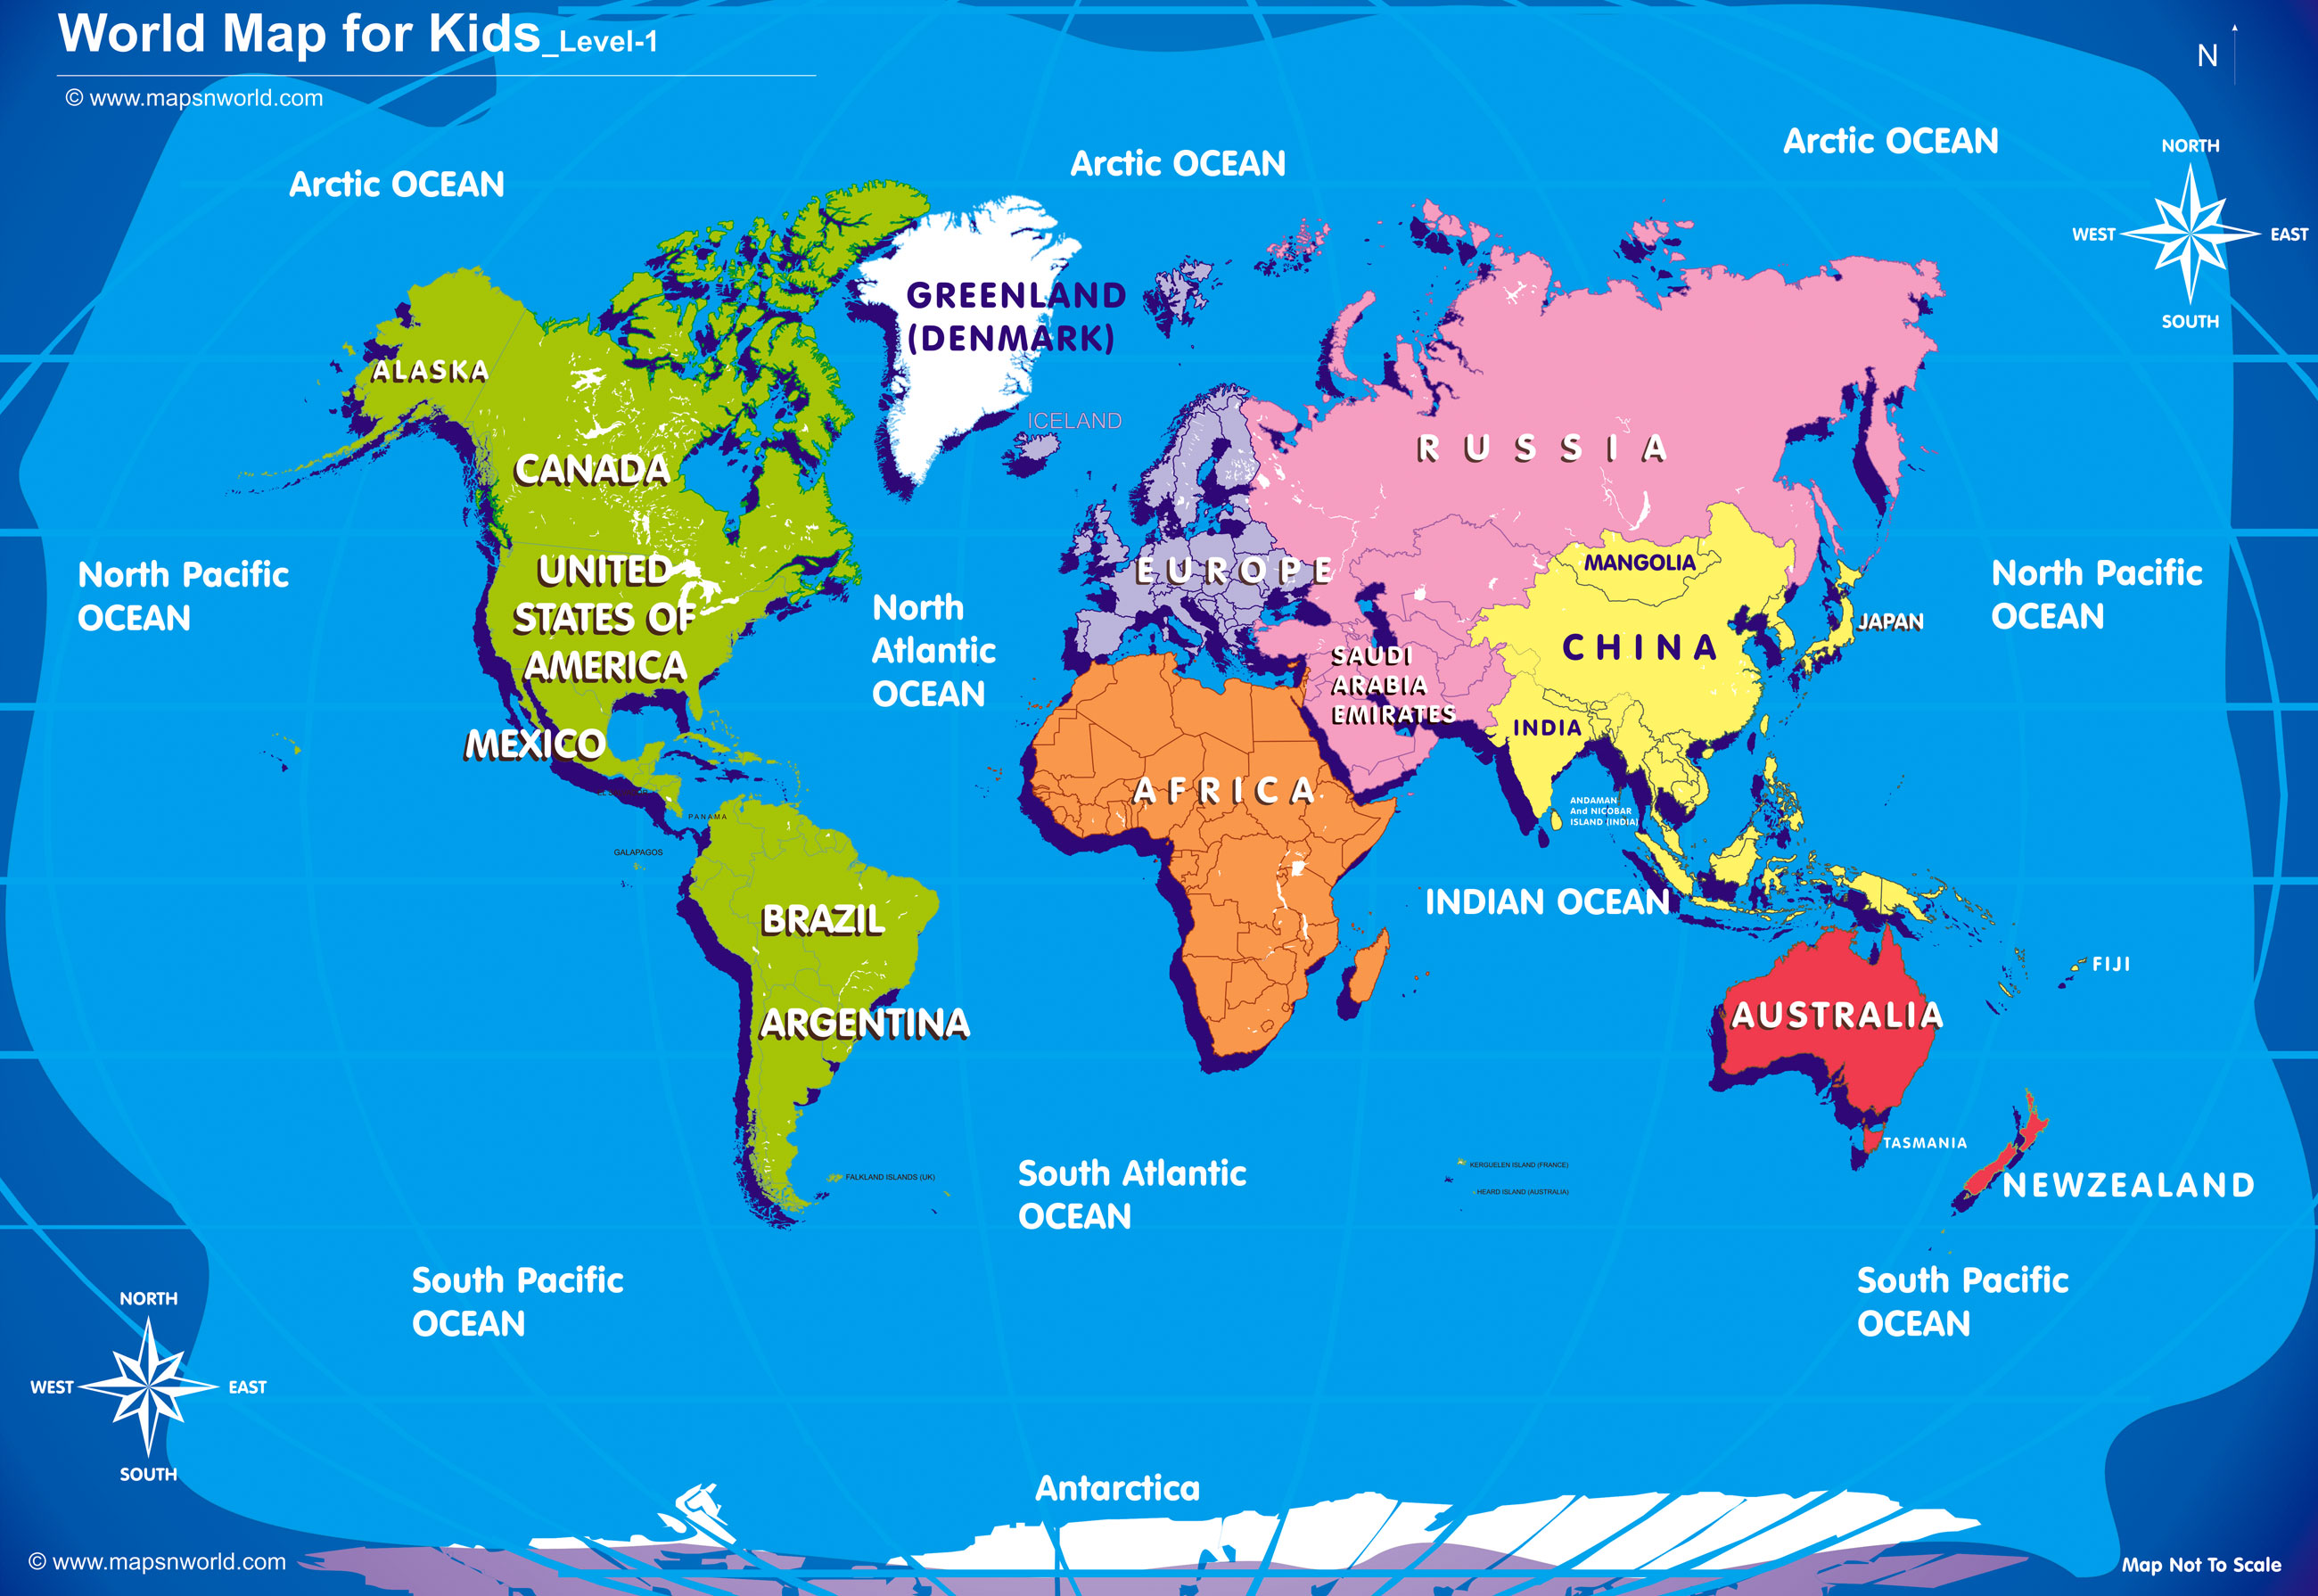 World Map for kids Big Size